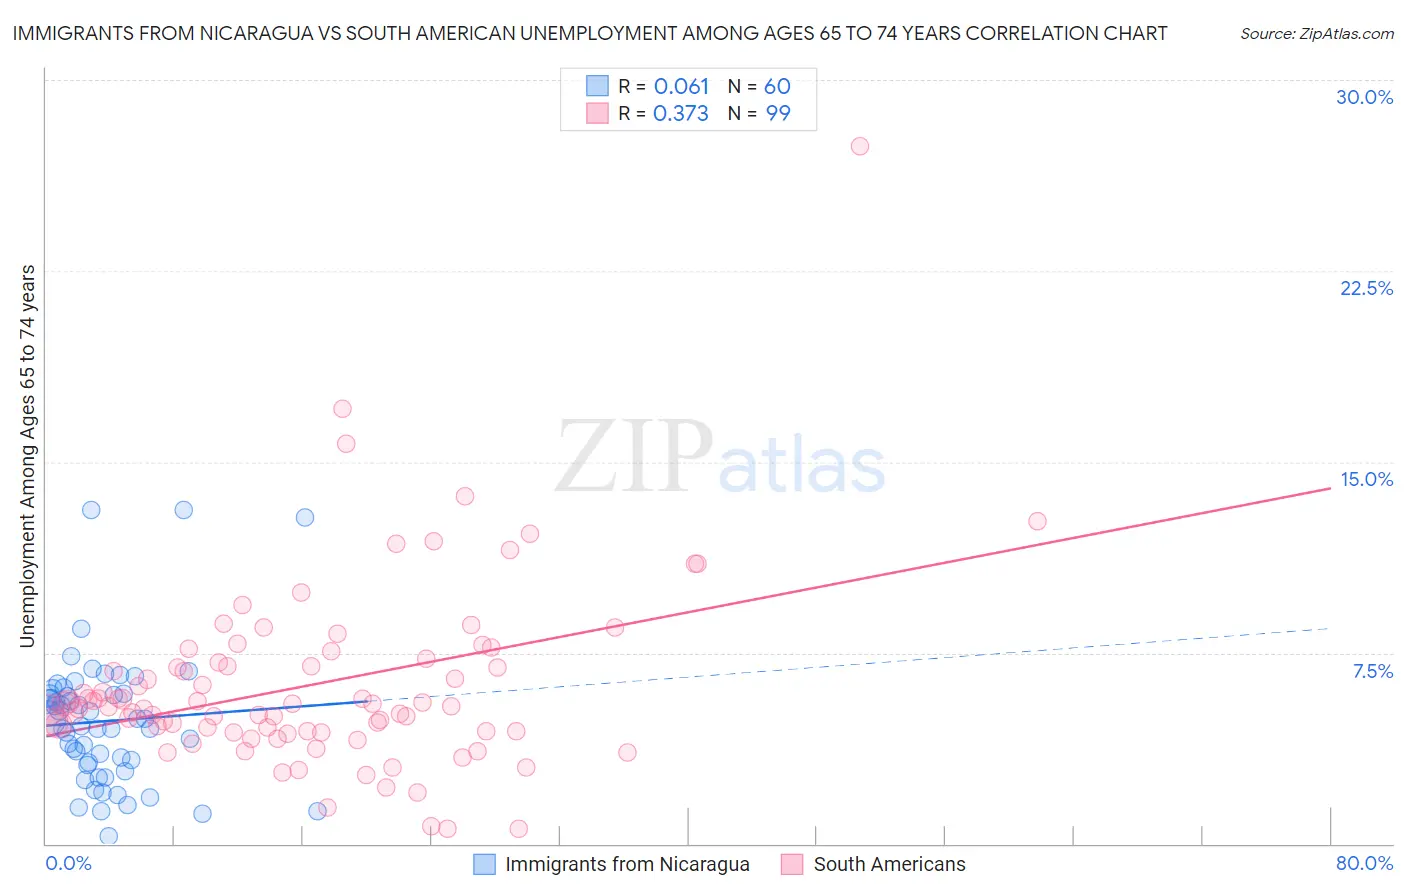 Immigrants from Nicaragua vs South American Unemployment Among Ages 65 to 74 years